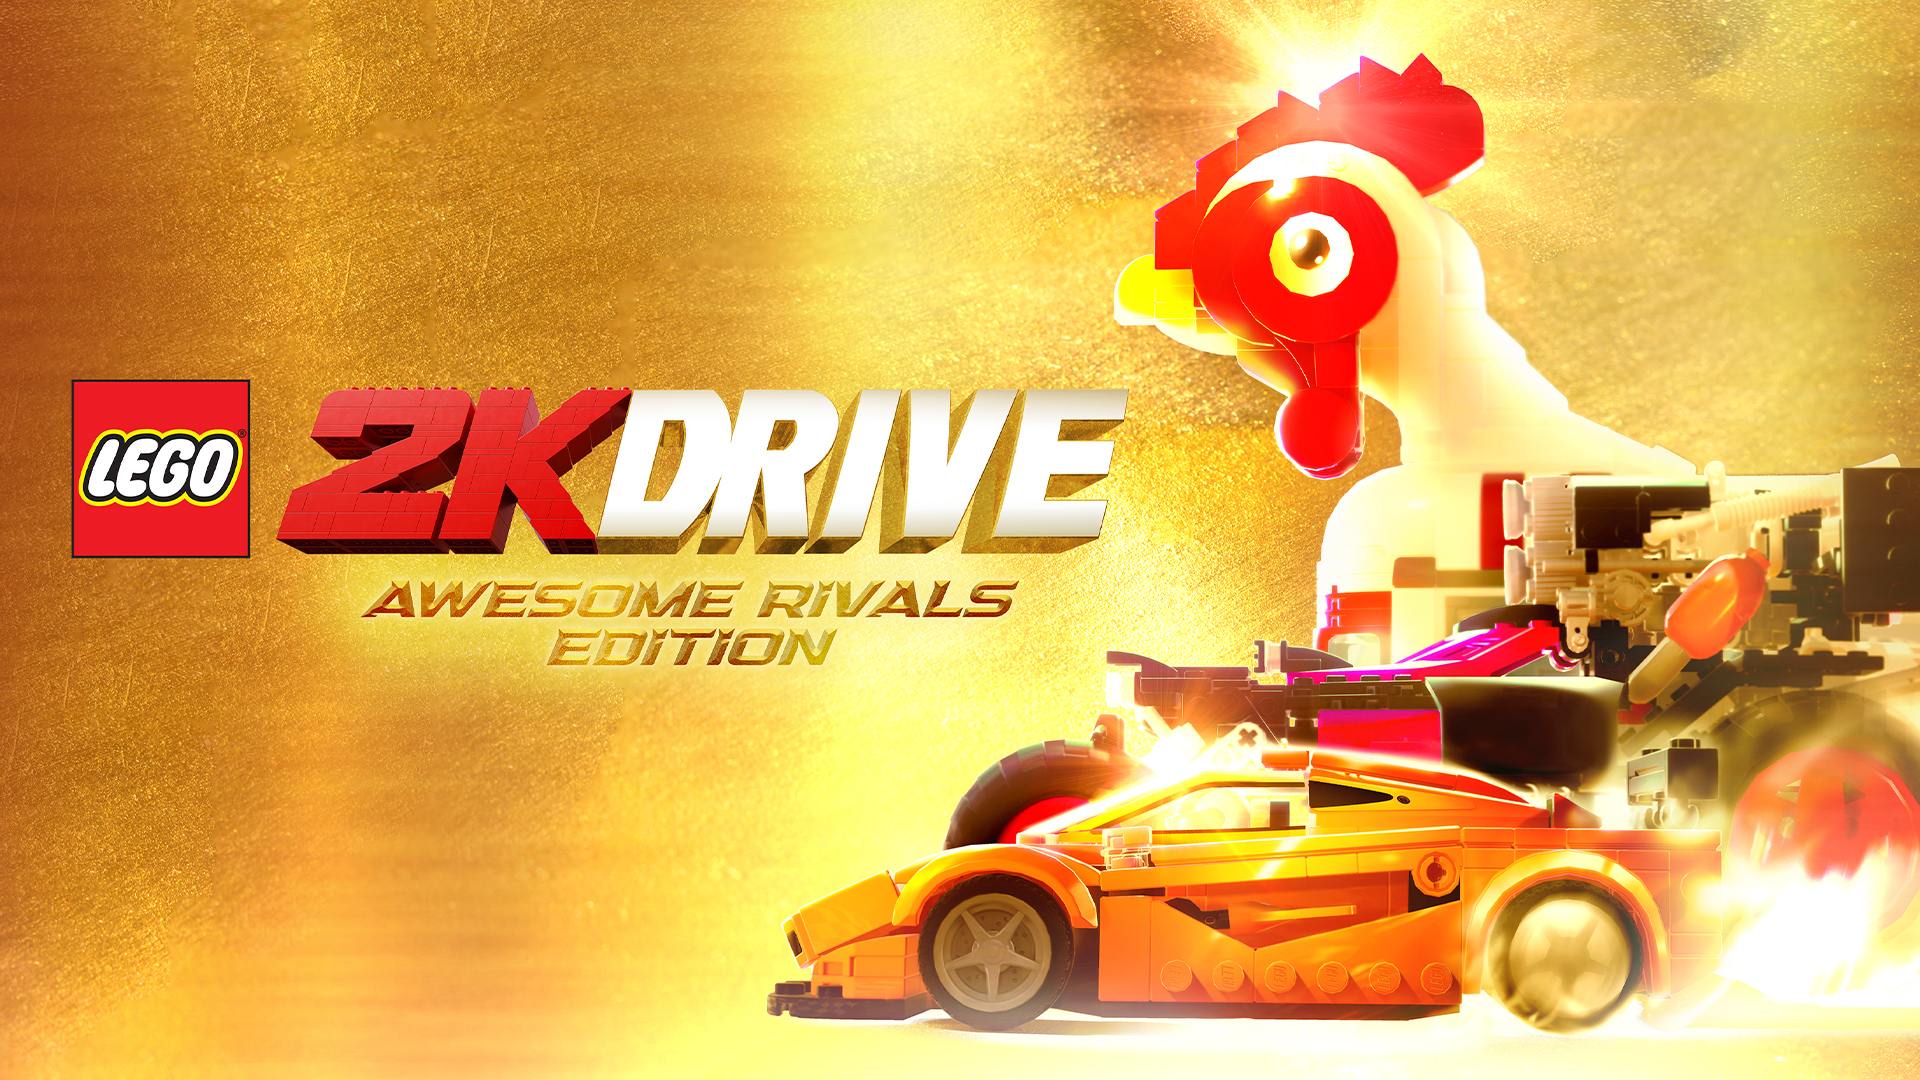 LEGO® 2K Drive Édition Awesome Rivals 1